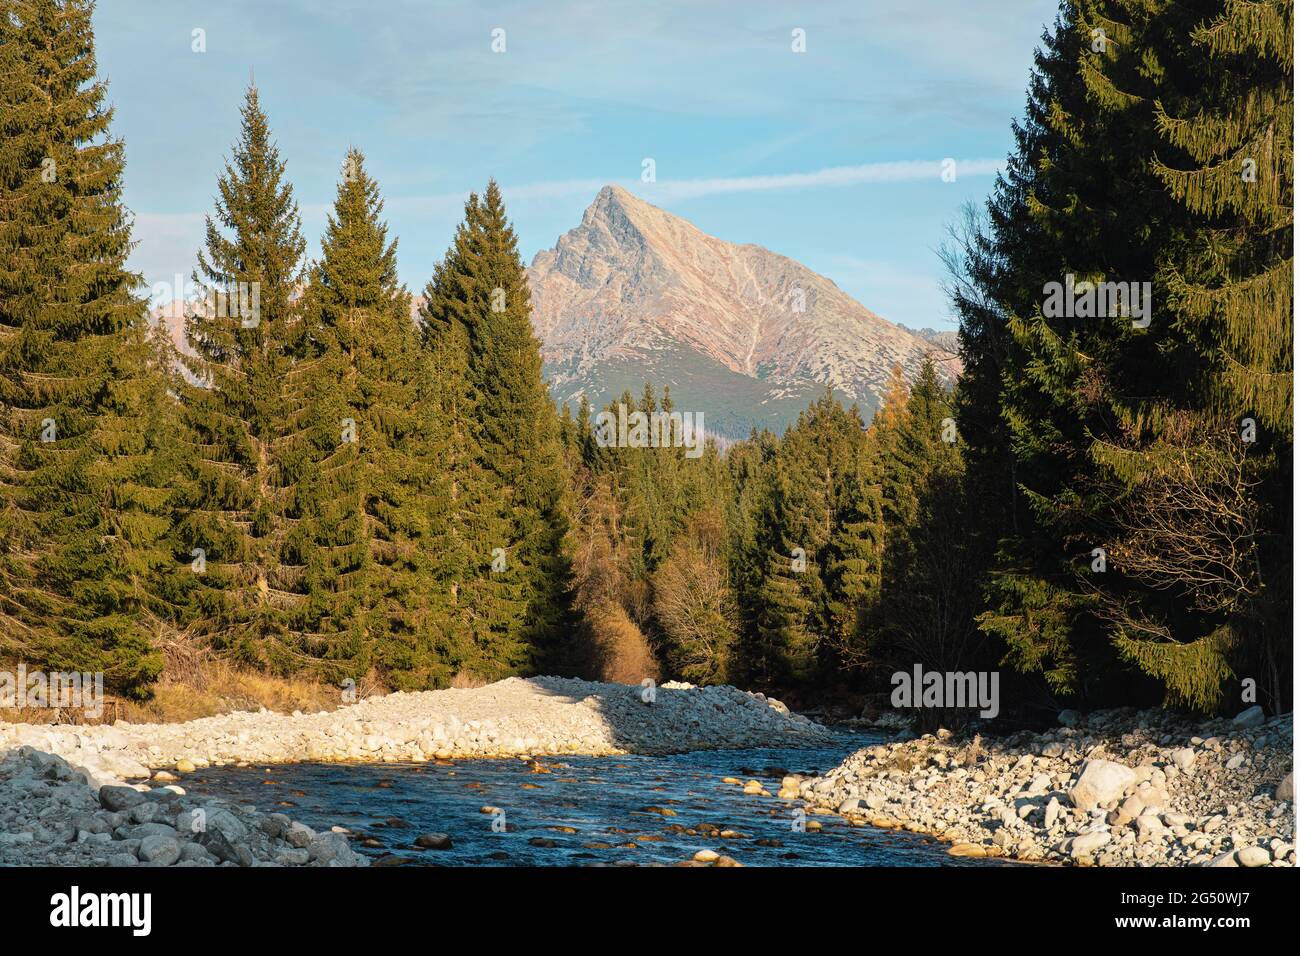 Forest river Bela with small round stones and coniferous trees on both sides, sunny day, Krivan peak - Slovak symbol - in distance Stock Photo